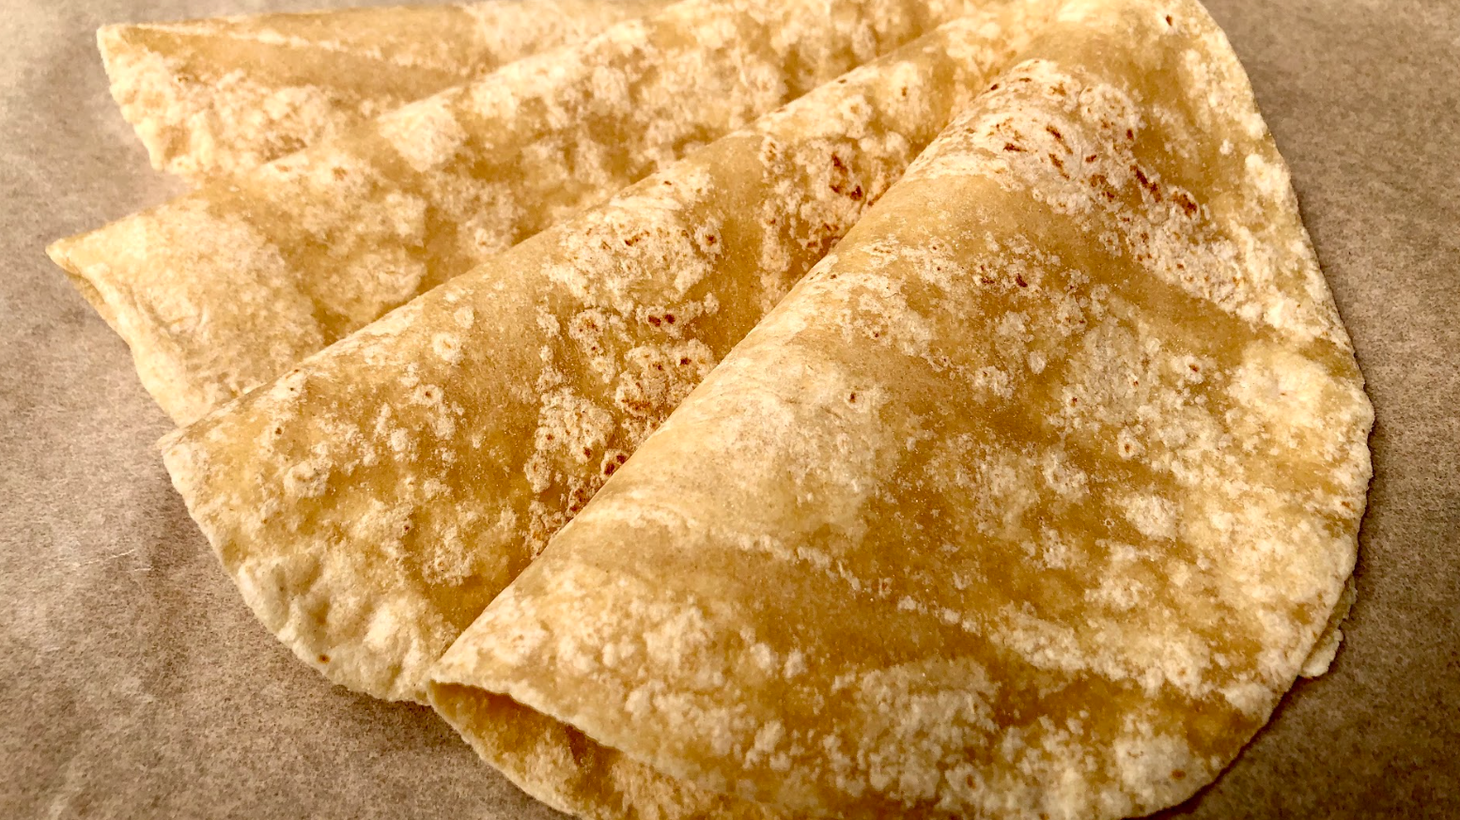 Tehachapi Grain Project is collaborating with other businesses to make flour tortillas from olive oil, pork lard, and beef tallow.